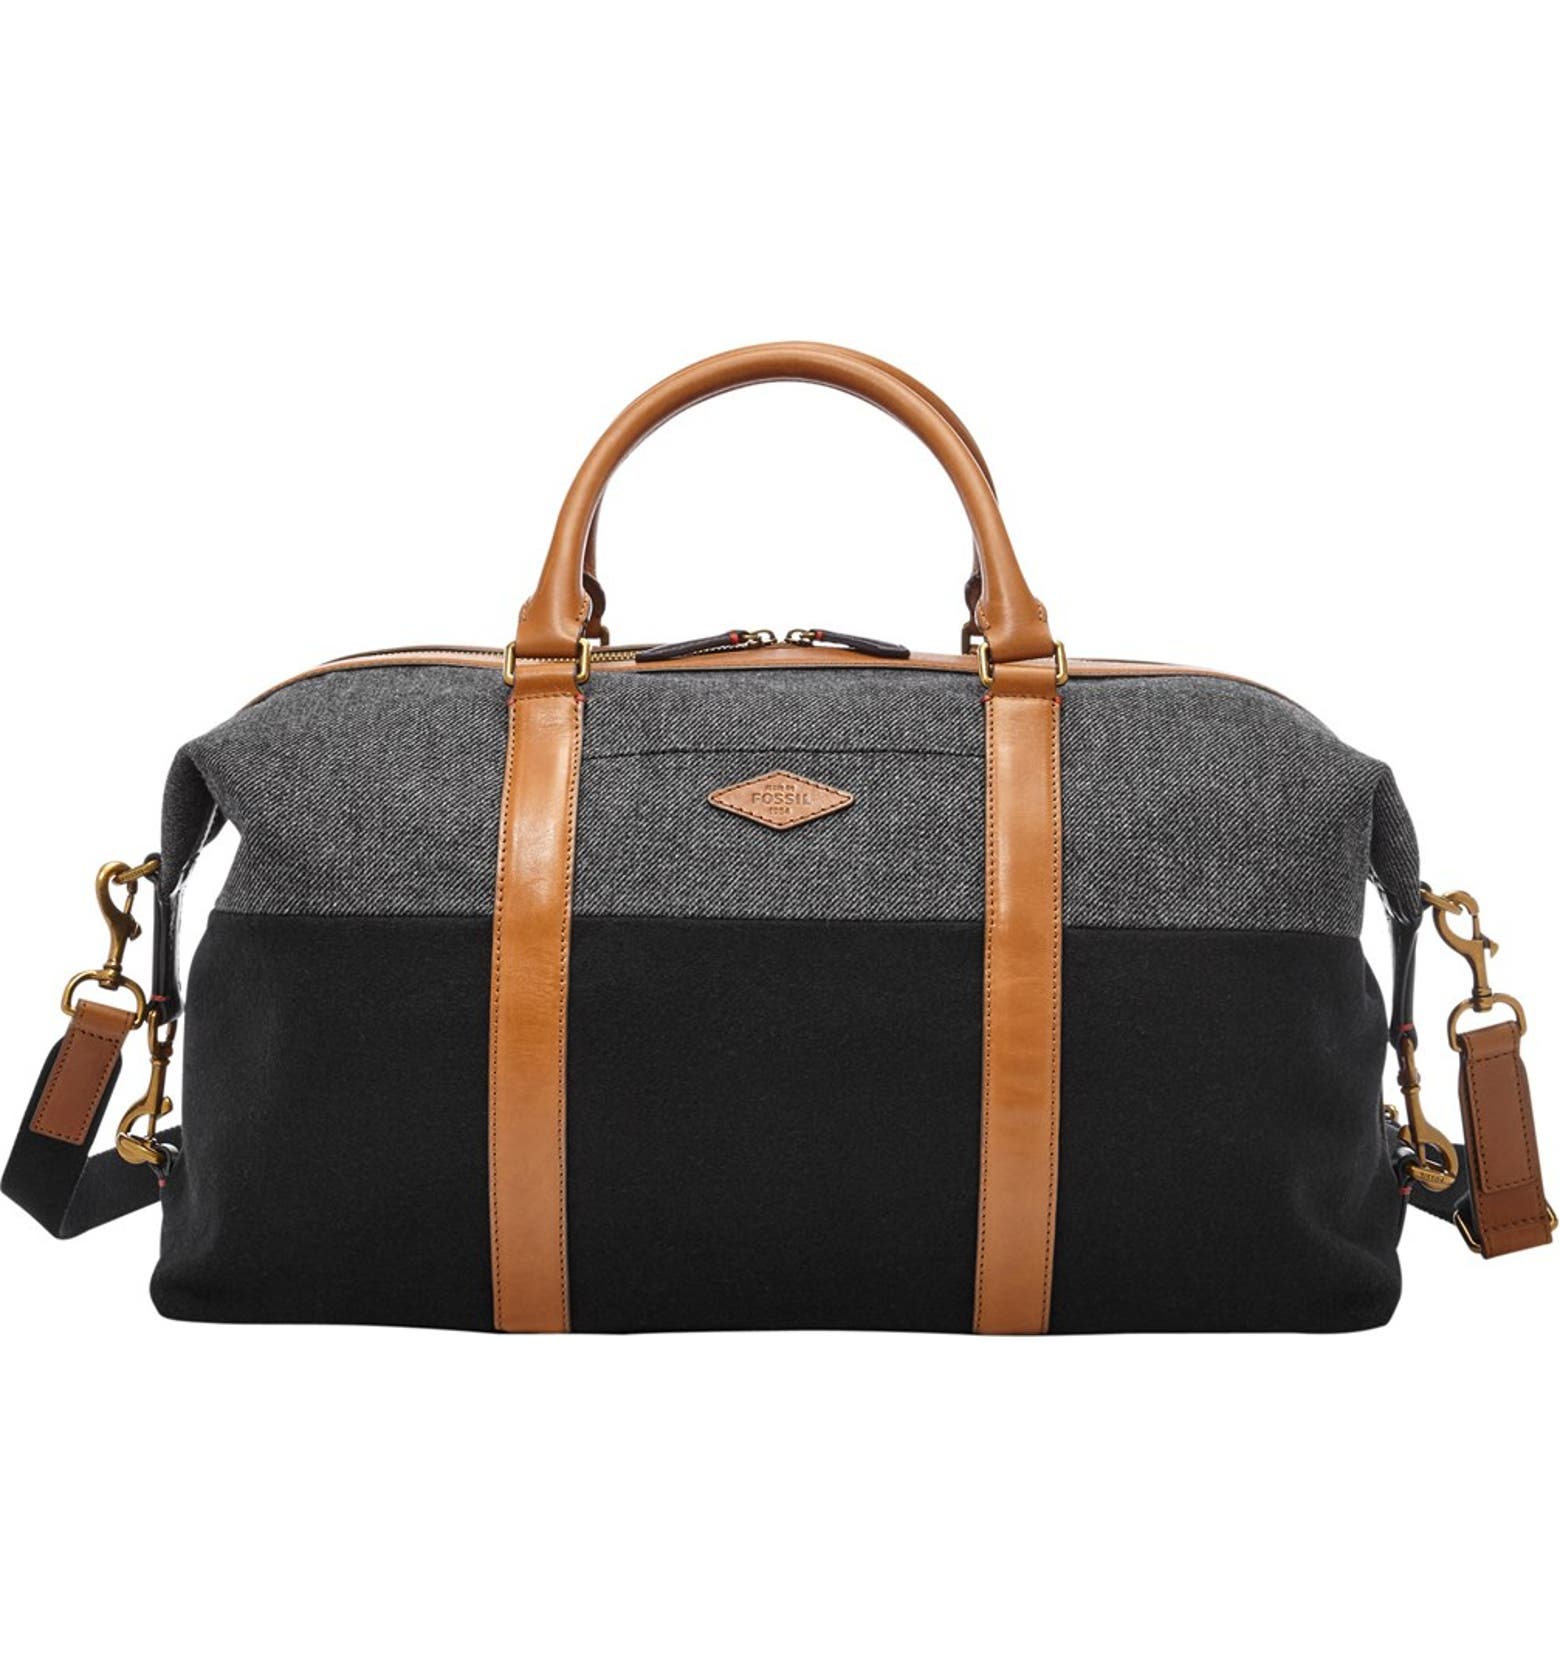 Fossil 'Campbell' Duffel Bag | Nordstrom